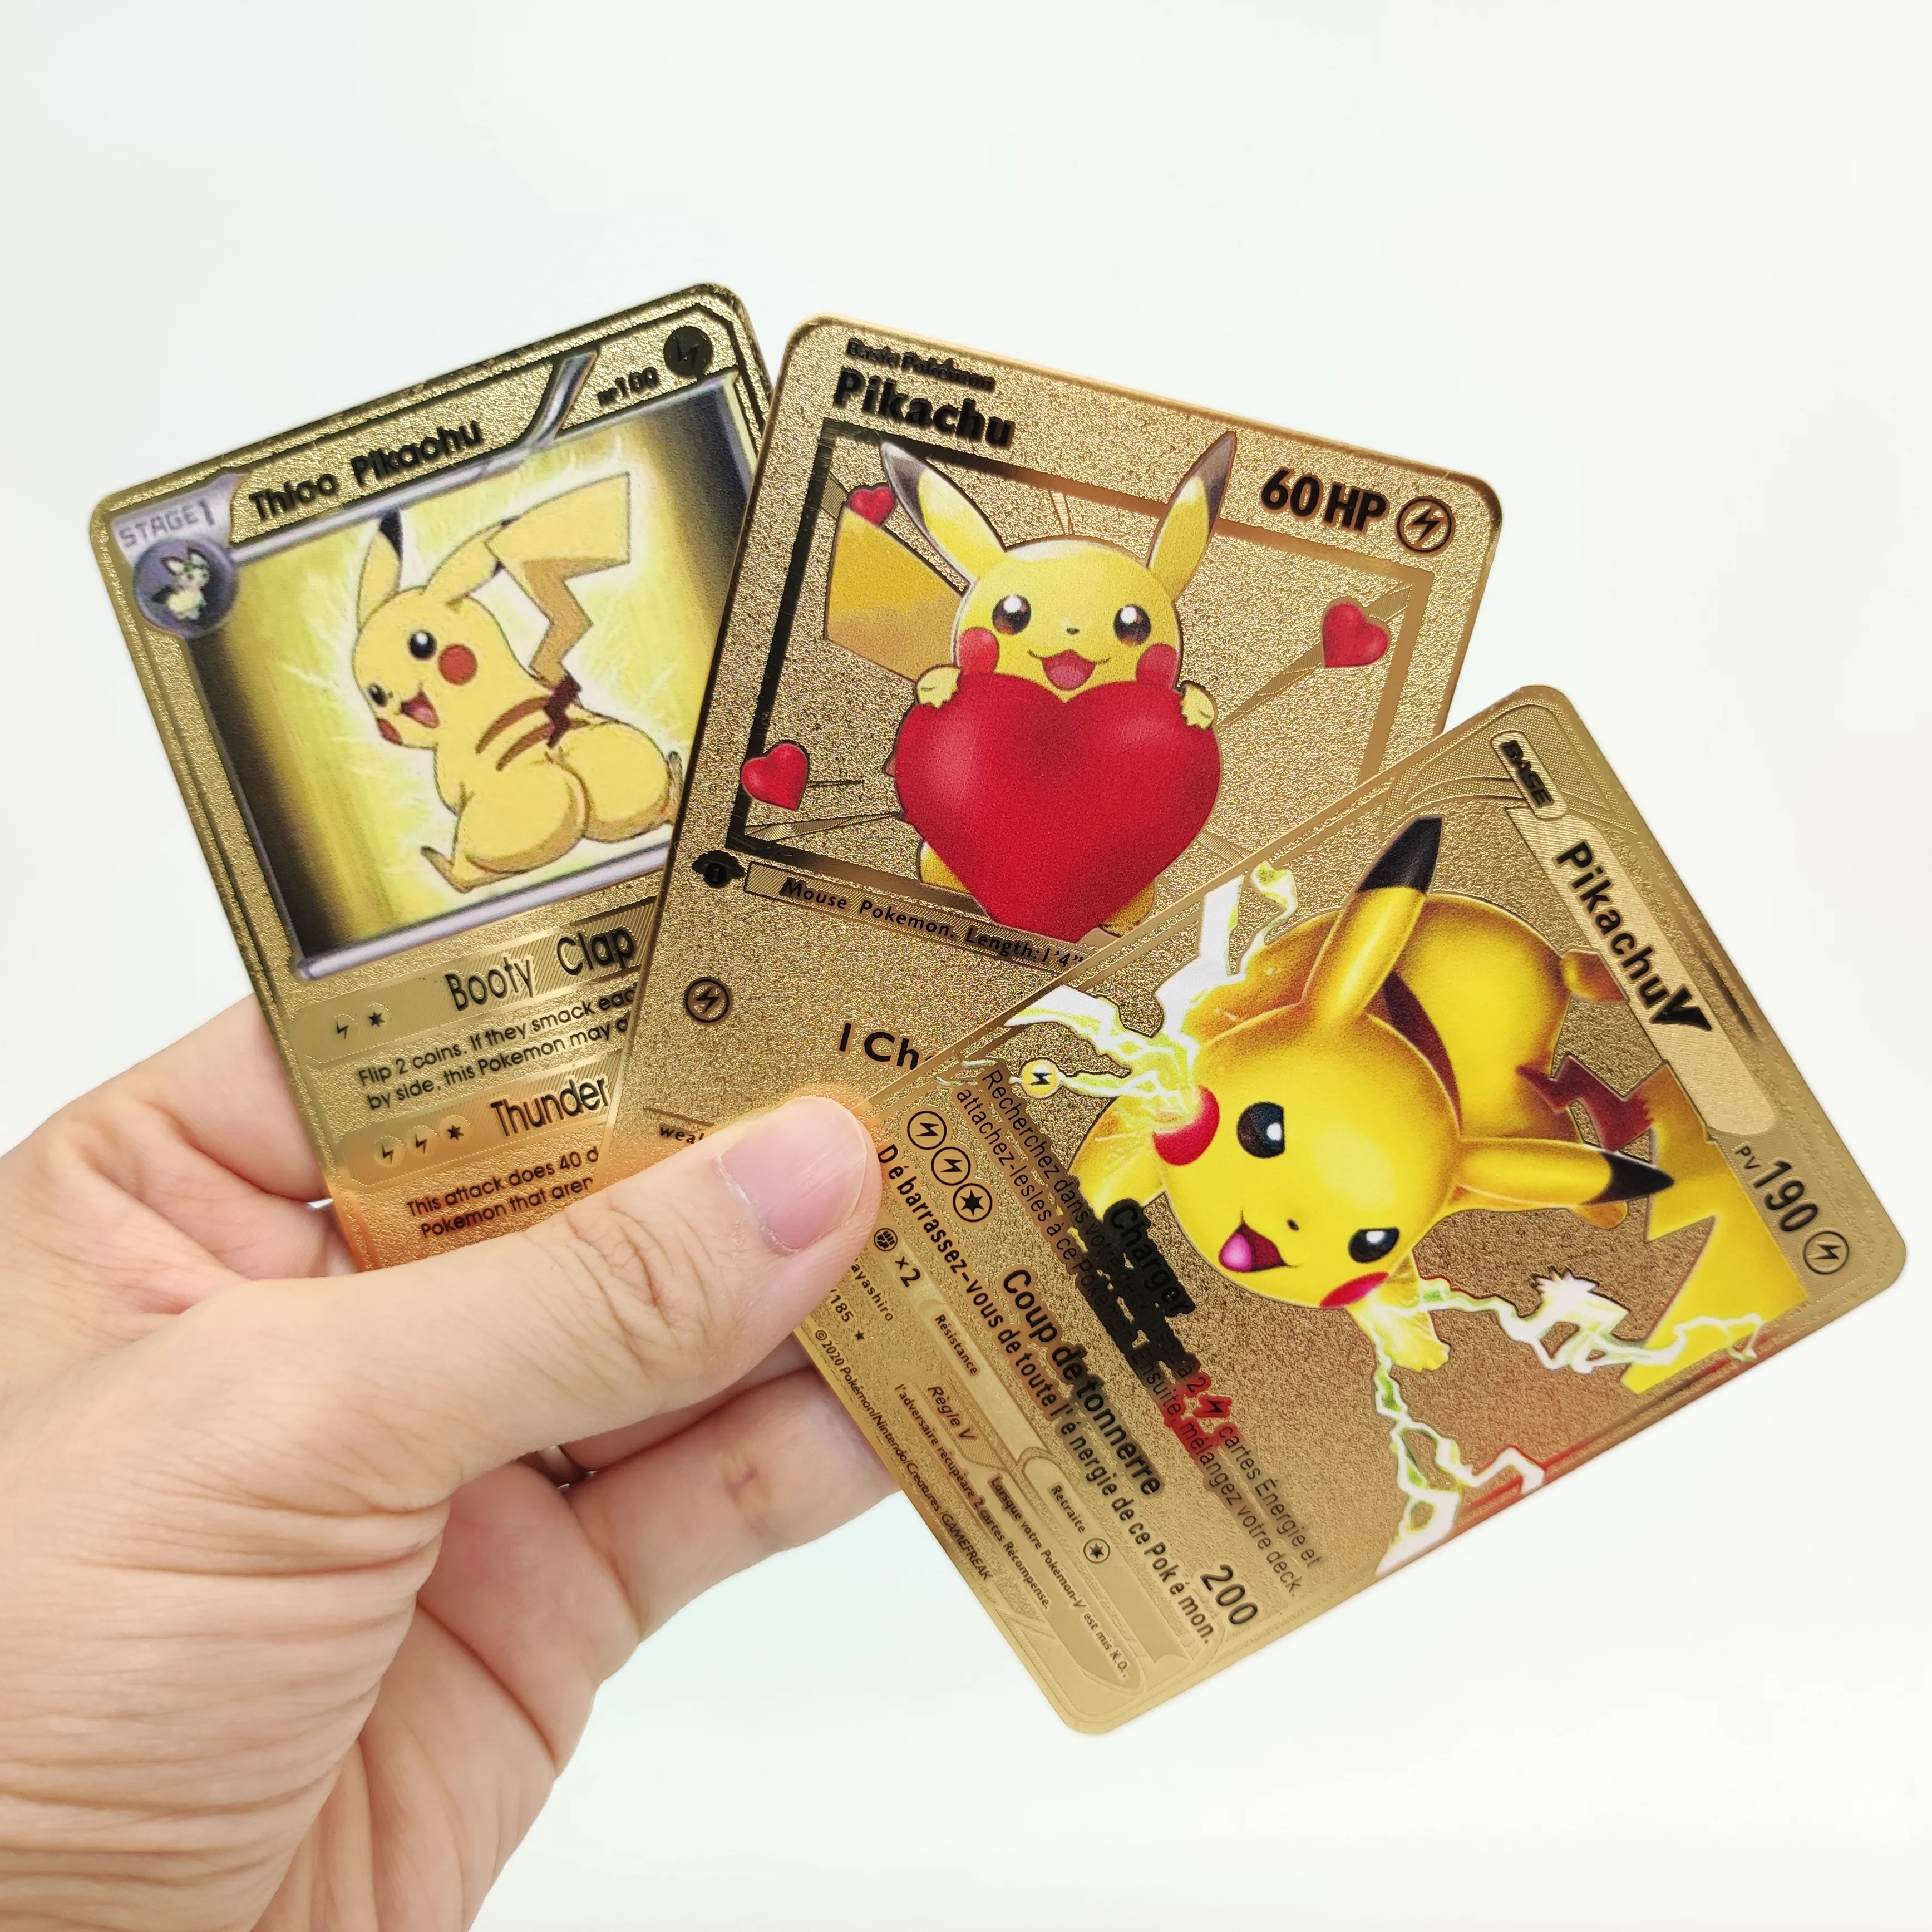 

2022 amazon RTS I Choose You Pikachu Vmax Charizard V Gold Metal Pokemon Cards 1st edition Charizard GX New Trading Cards Game